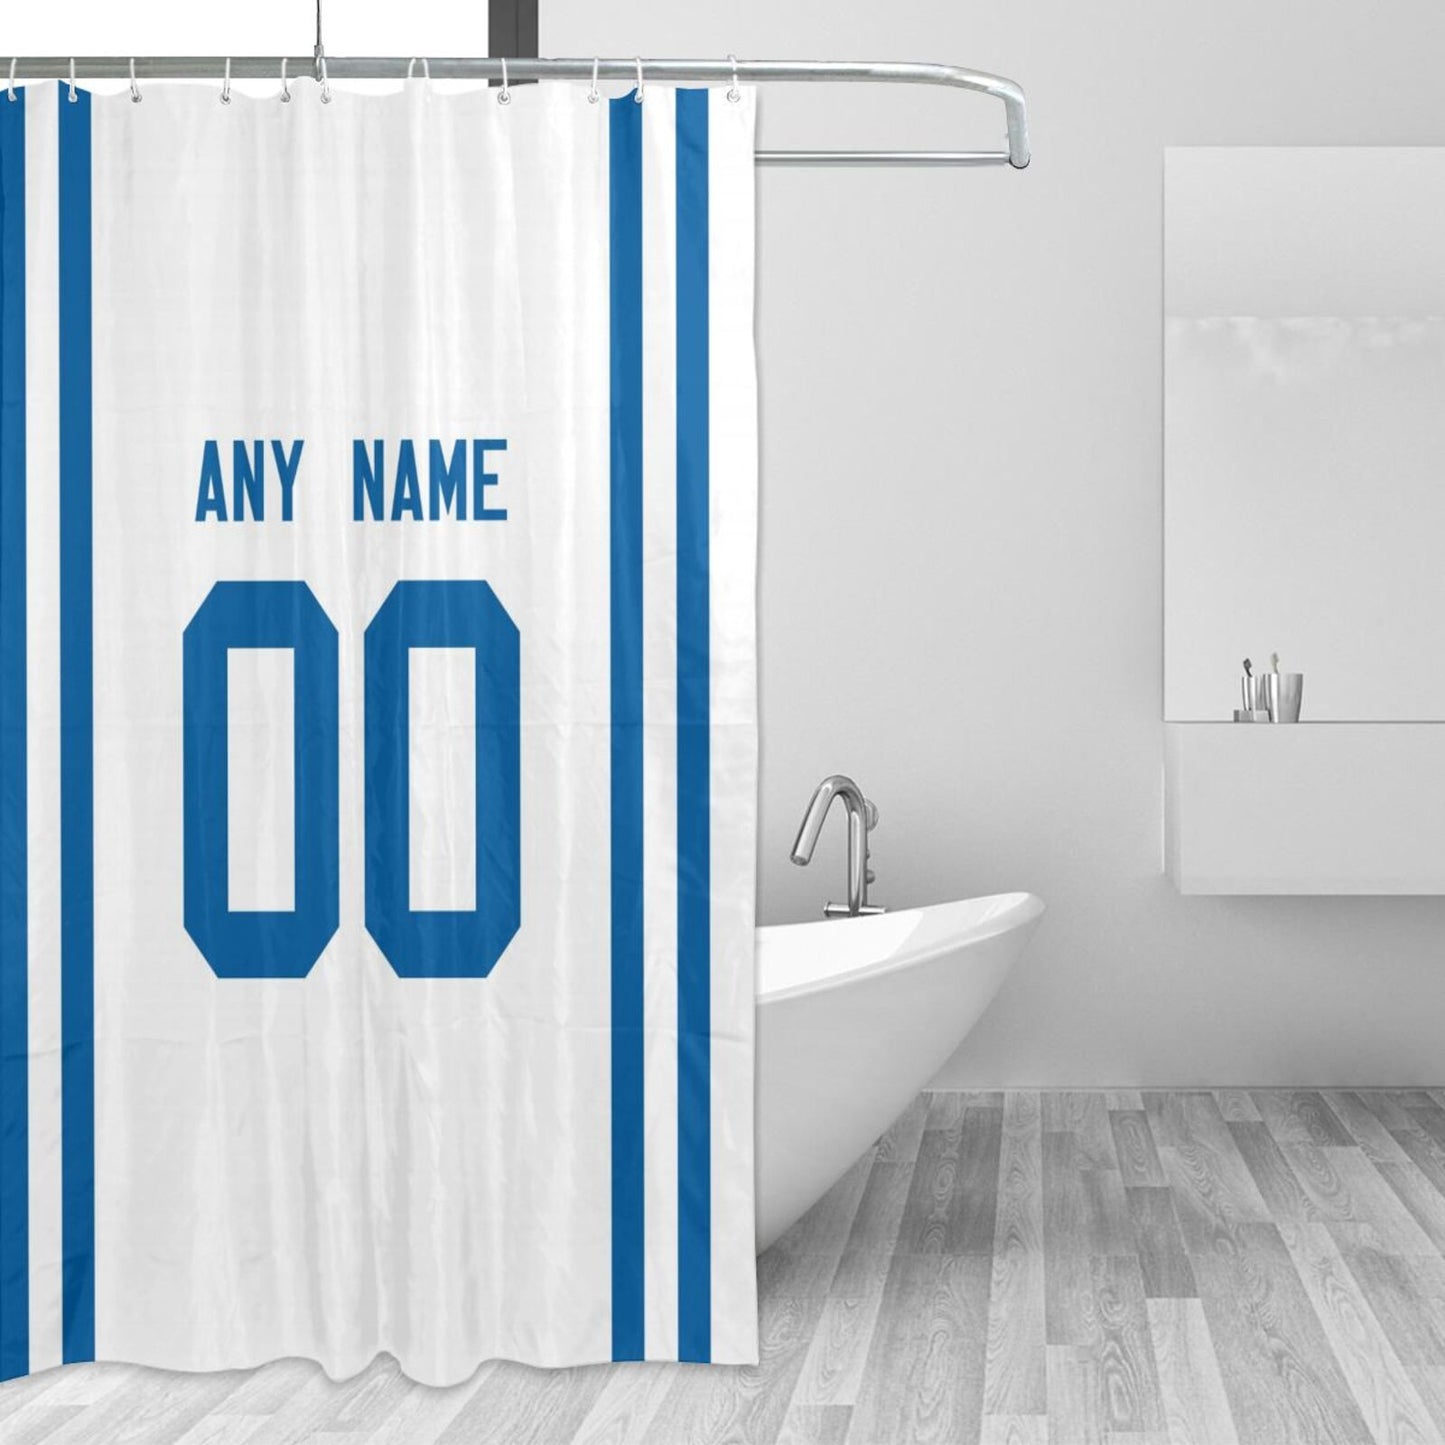 Custom Football Indianapolis Colts style personalized shower curtain custom design name and number set of 12 shower curtain hooks Rings